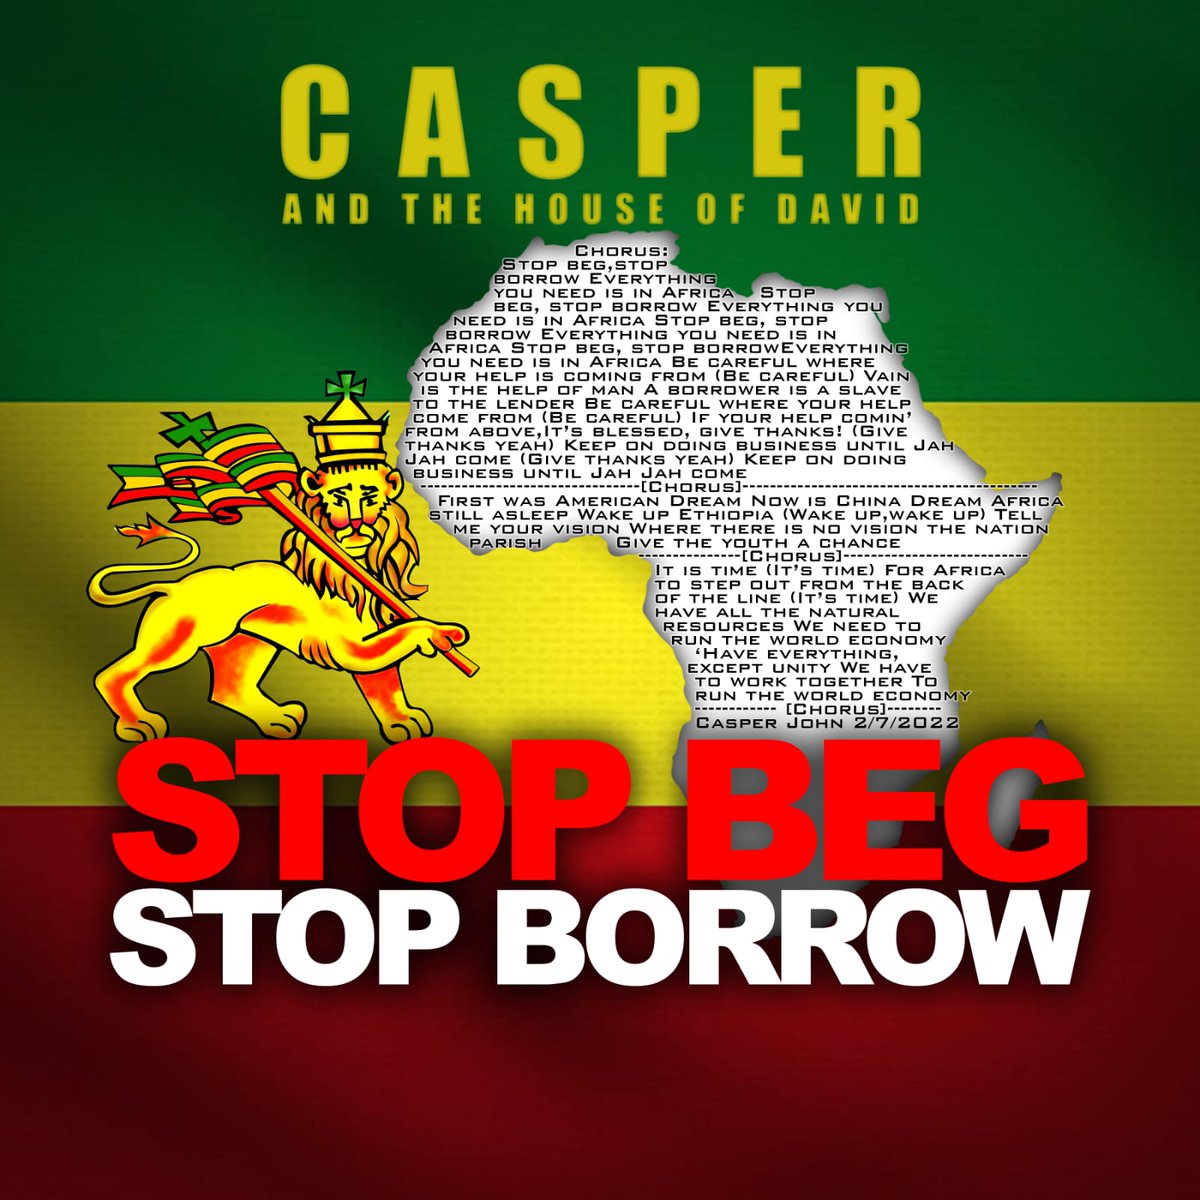 its time for all the old African leaders to step down and give the young people a chance to run the country. They are a bunch of thief and vagabond.#stopbegstopborrow #oneafrica #SouthAfrica #Rwanda #News #Africa #NewsAfrica #Niger #Mali #Macron